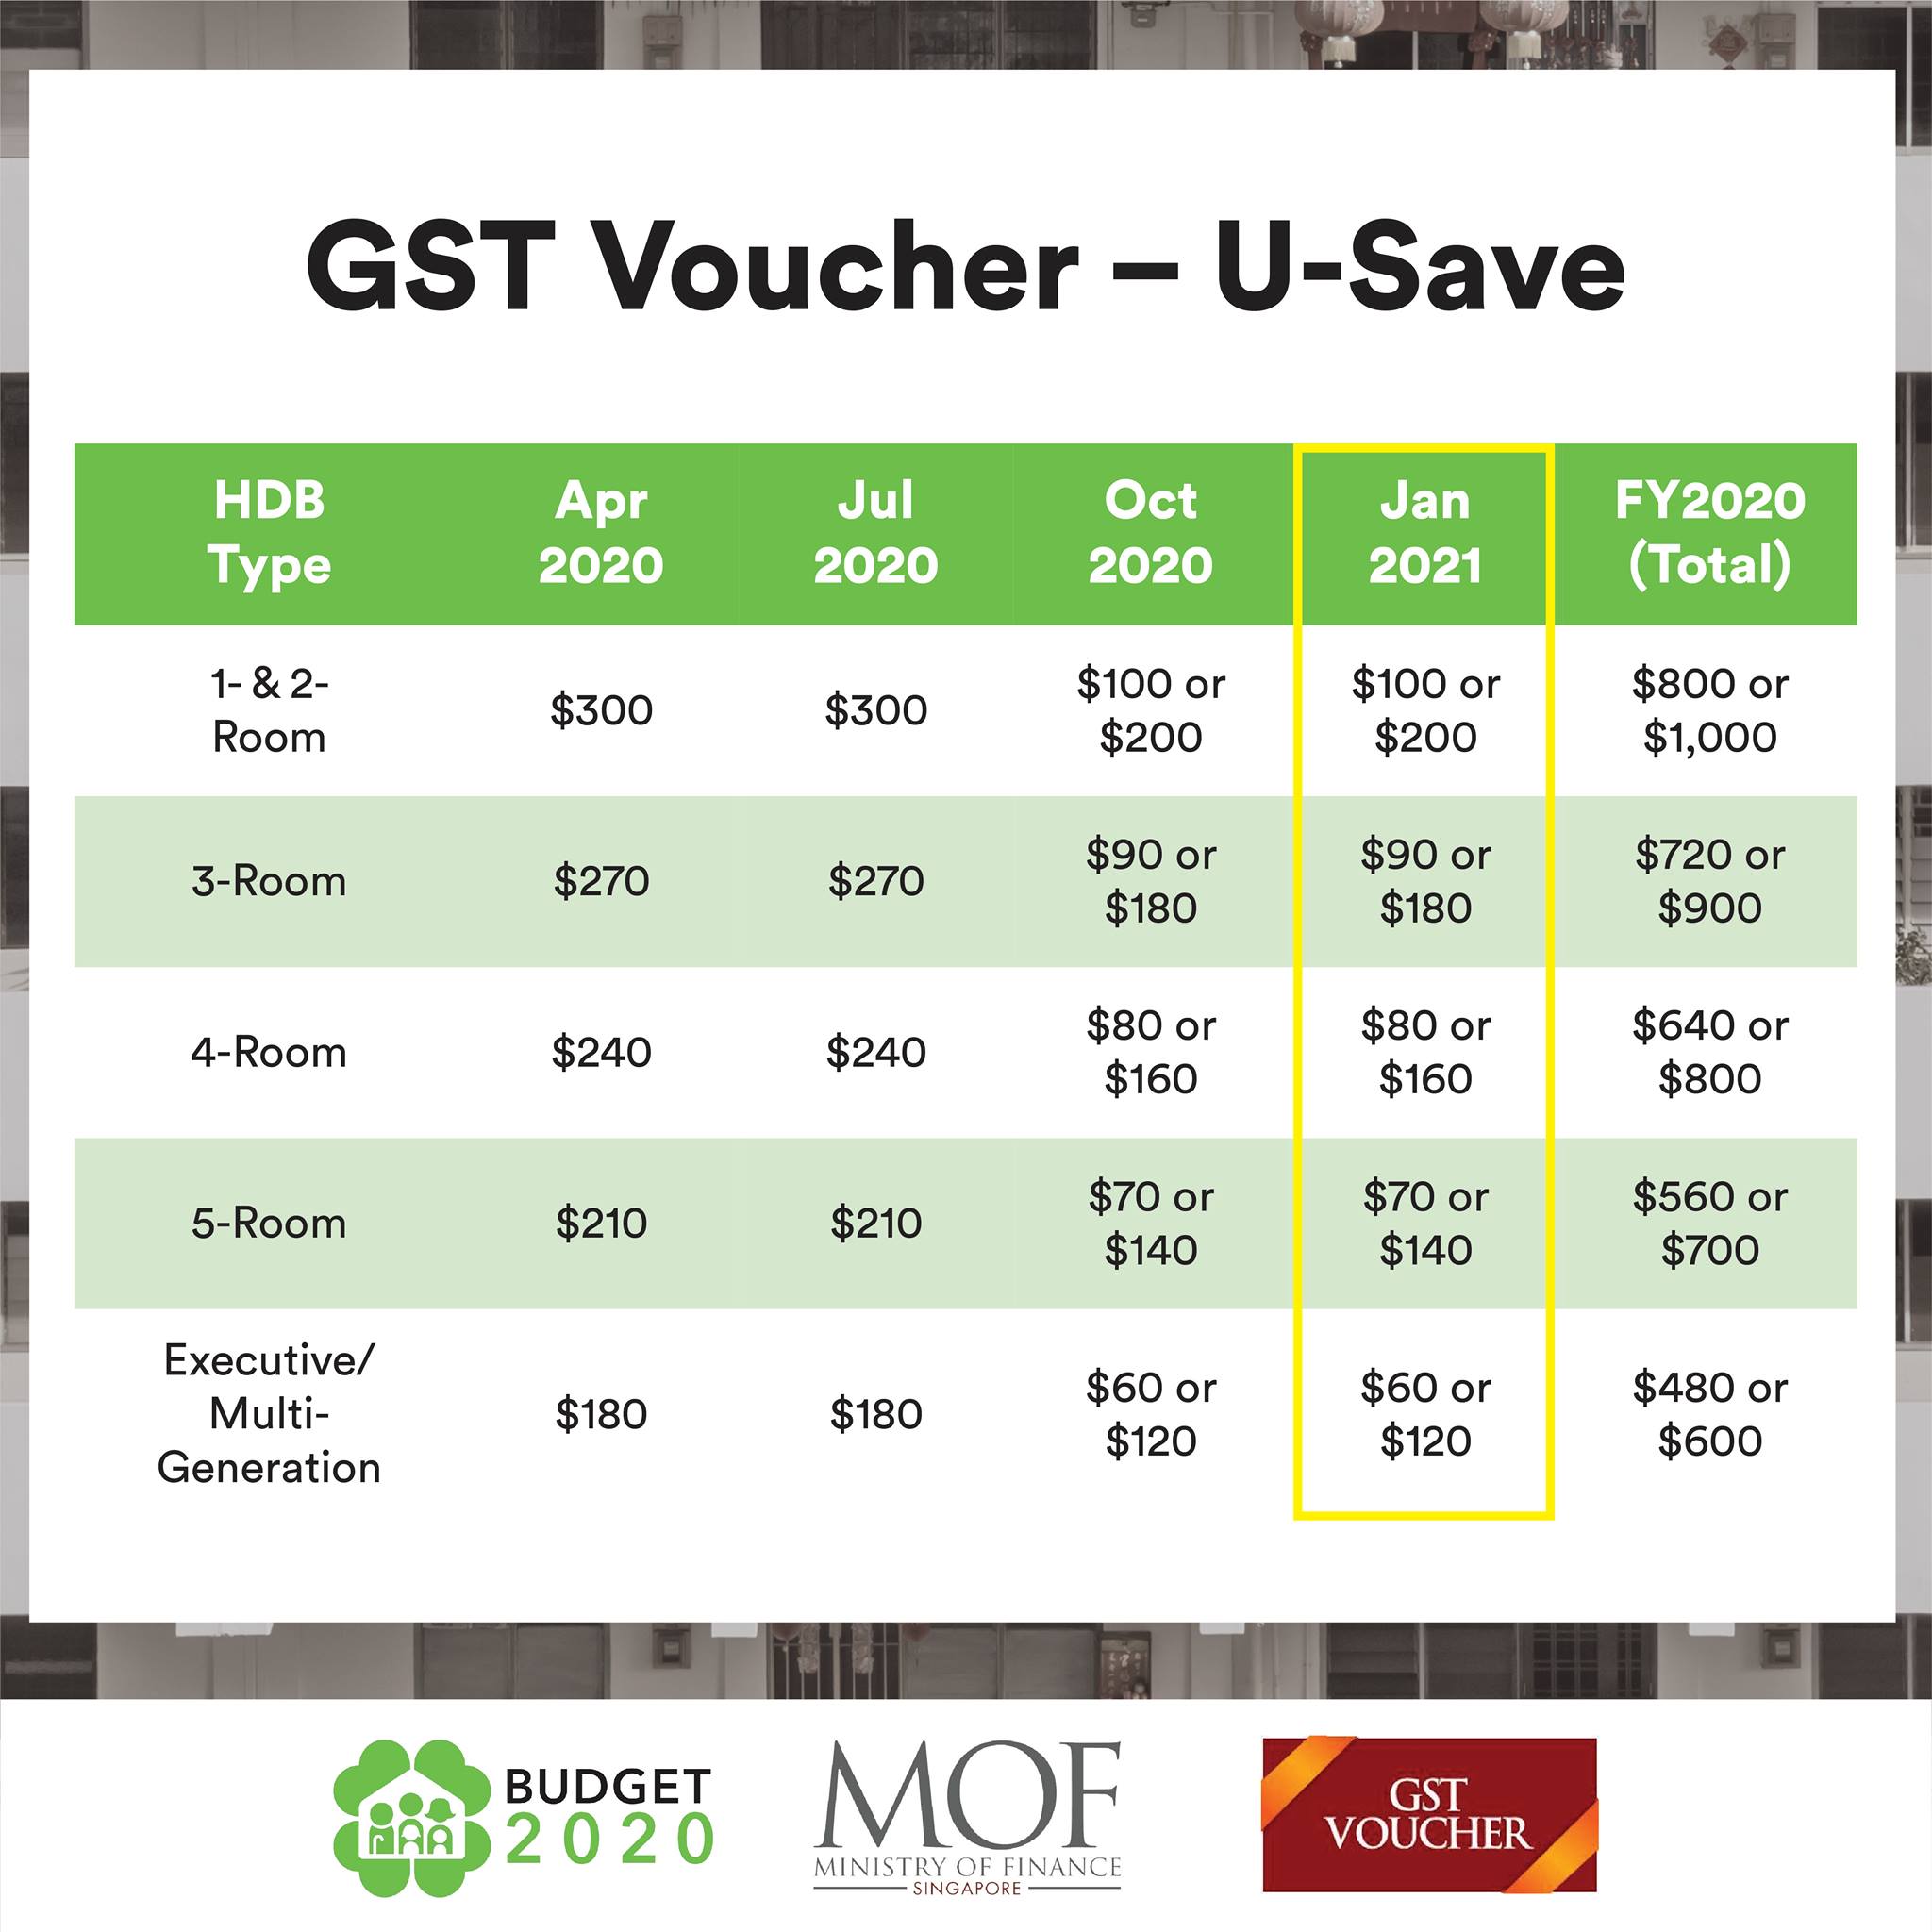 940 000 Households In S pore Will Receive Double Their Regular GST 